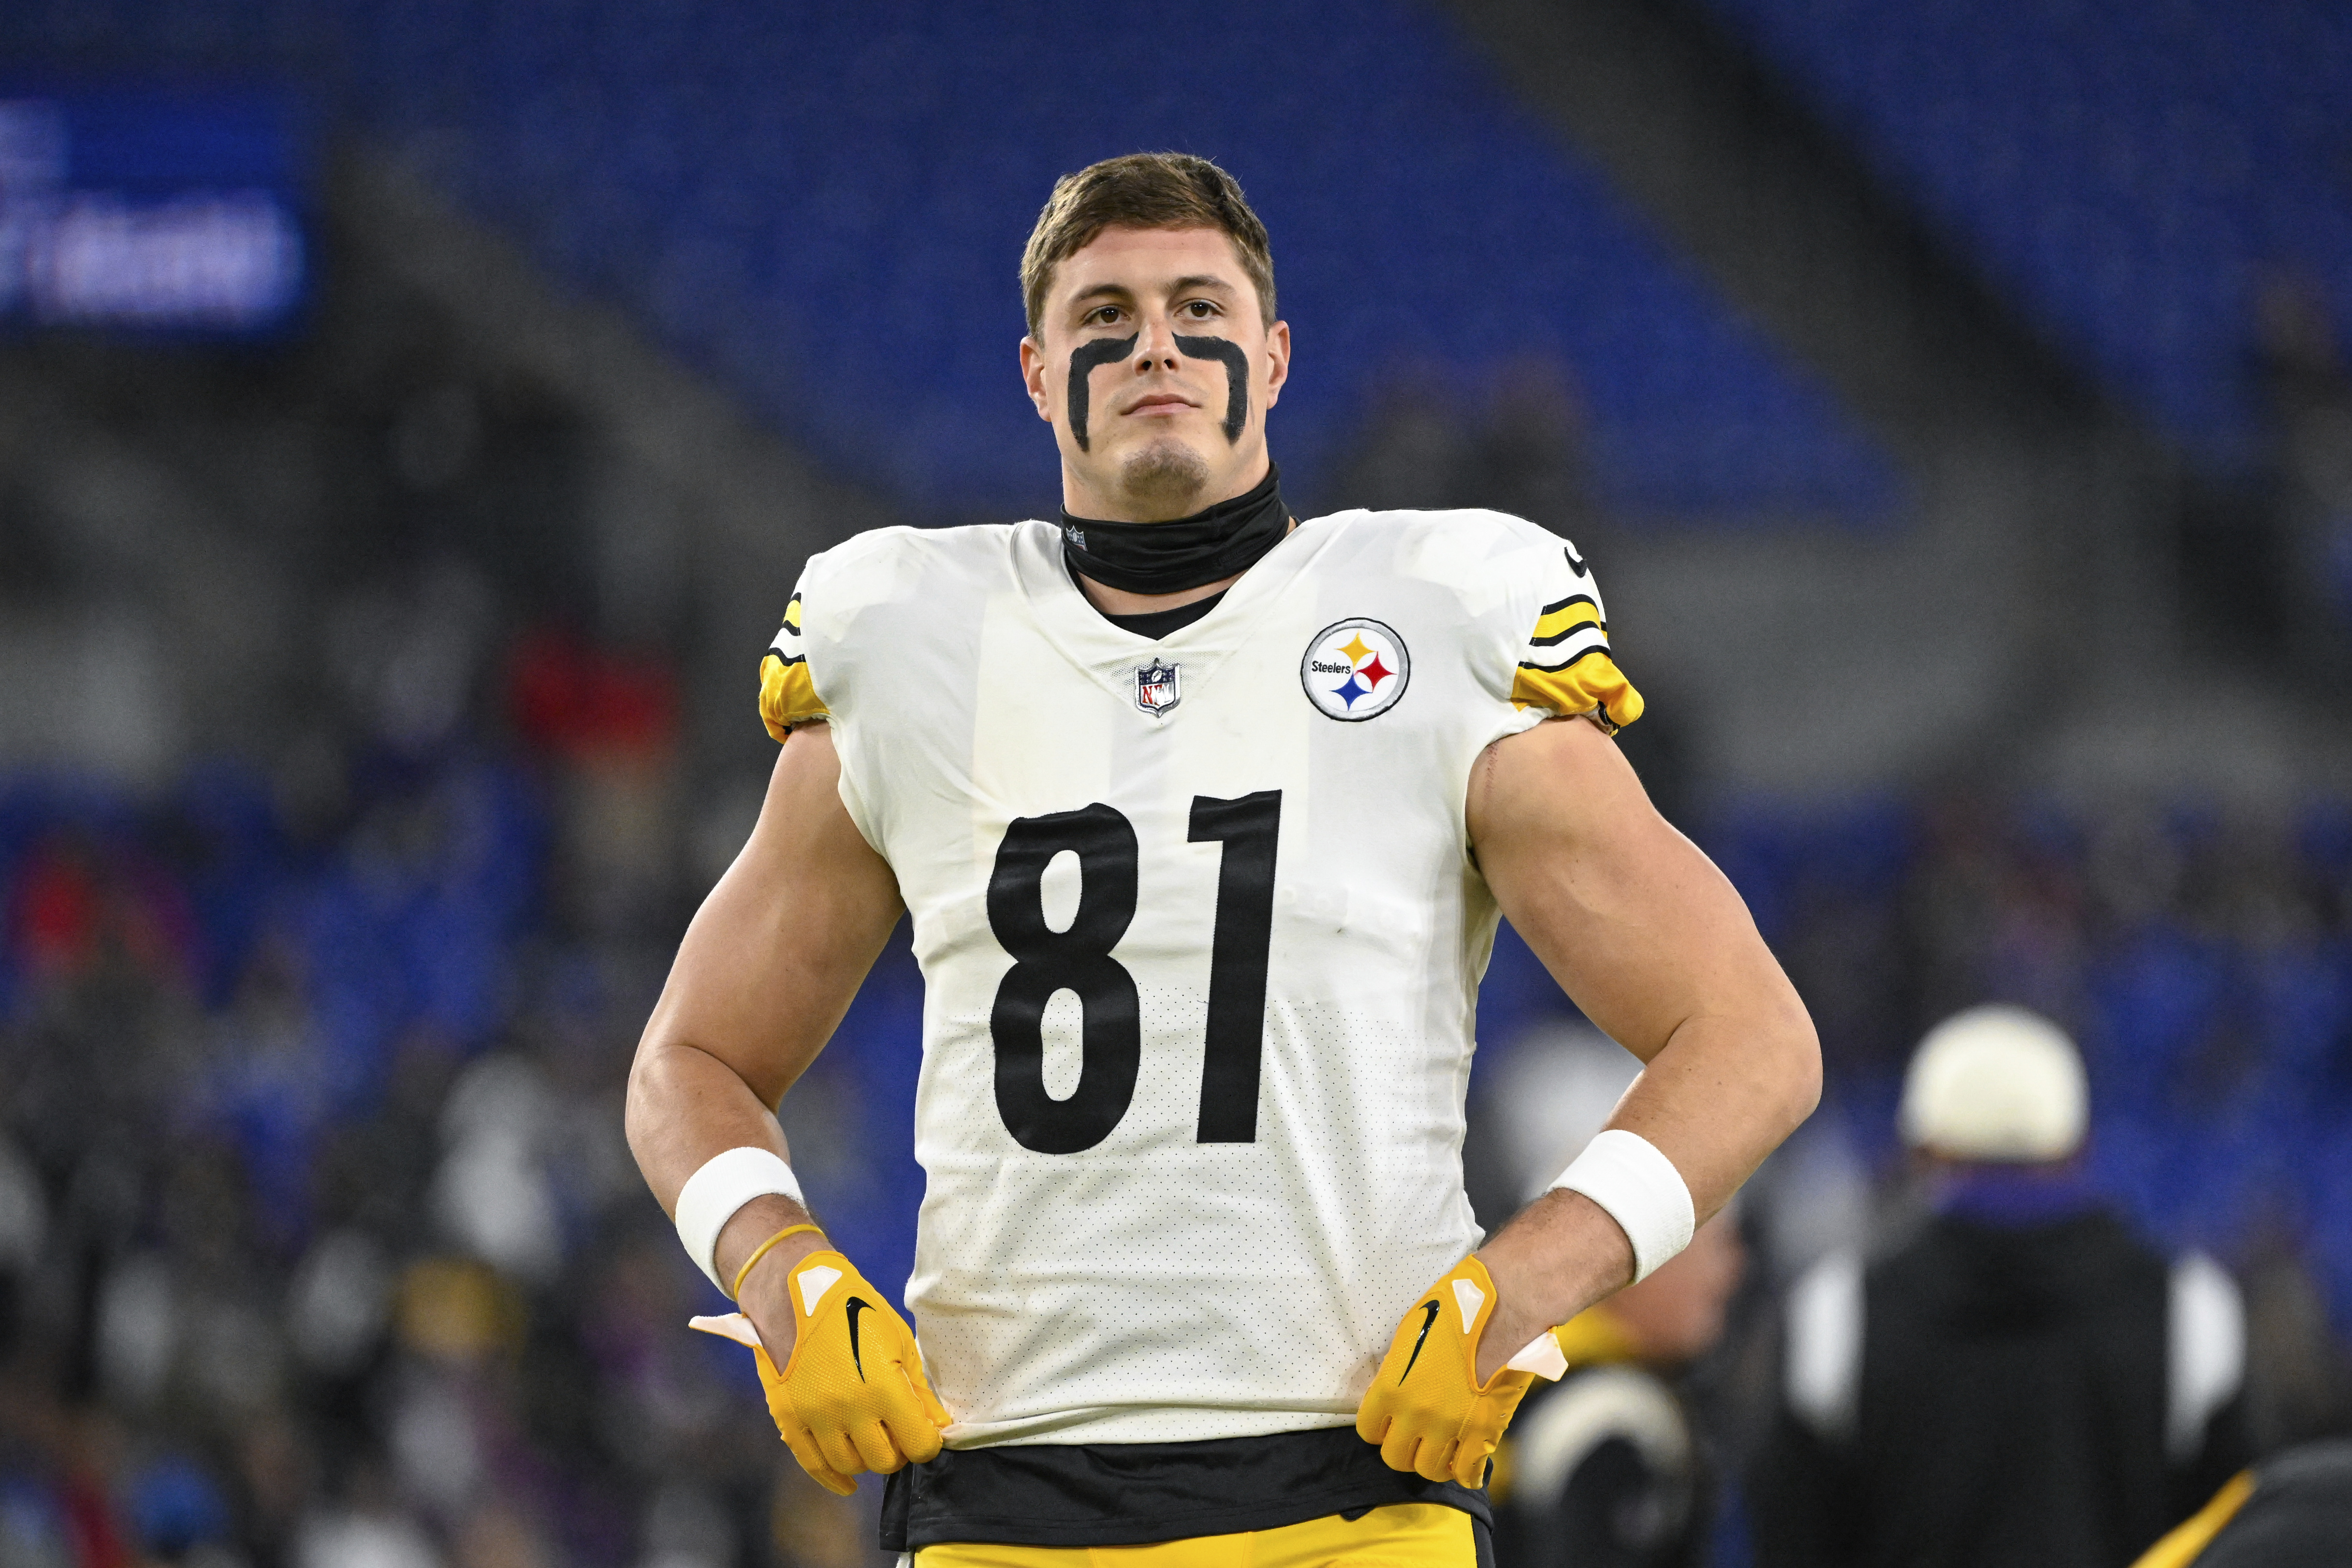 Ex-Michigan QB turned tight end cut by Steelers after 4 years in NFL 